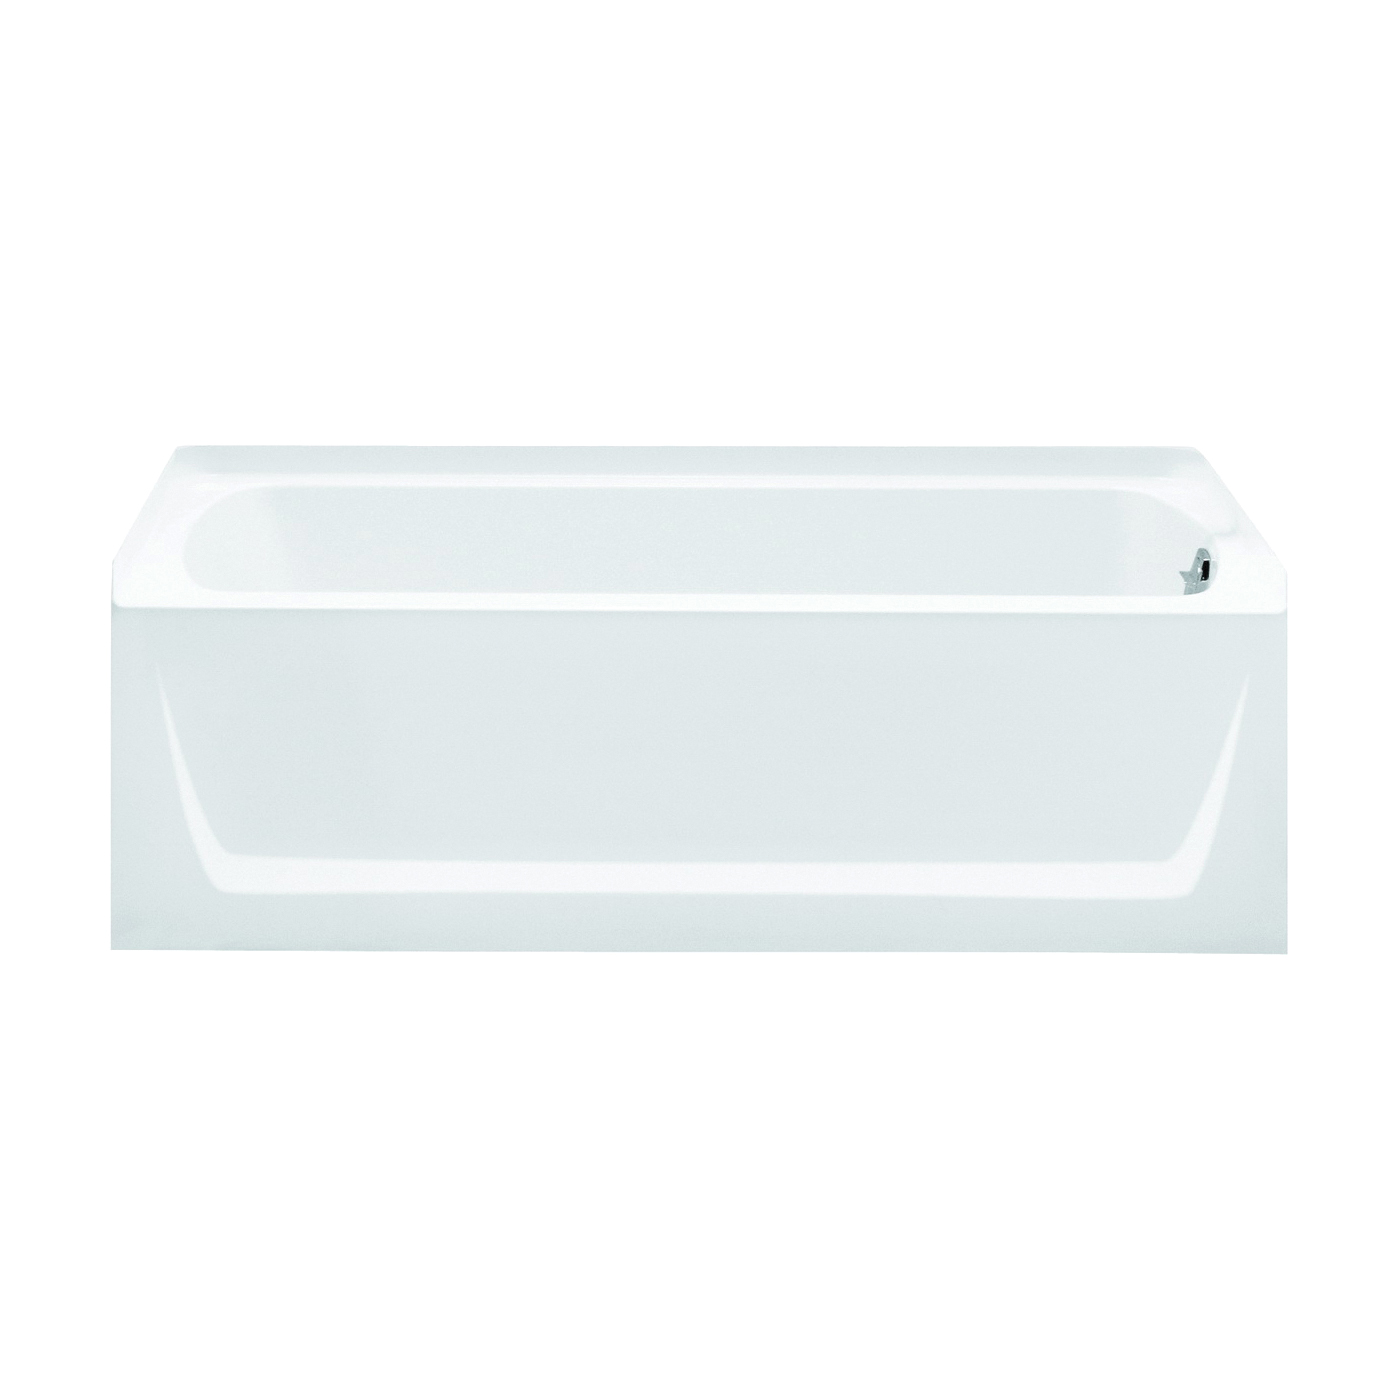 Ensemble 71121120-0 Bathtub, 55 gal Capacity, 60 in L, 32 in W, 20 in H, Alcove Installation, Vikrell, White